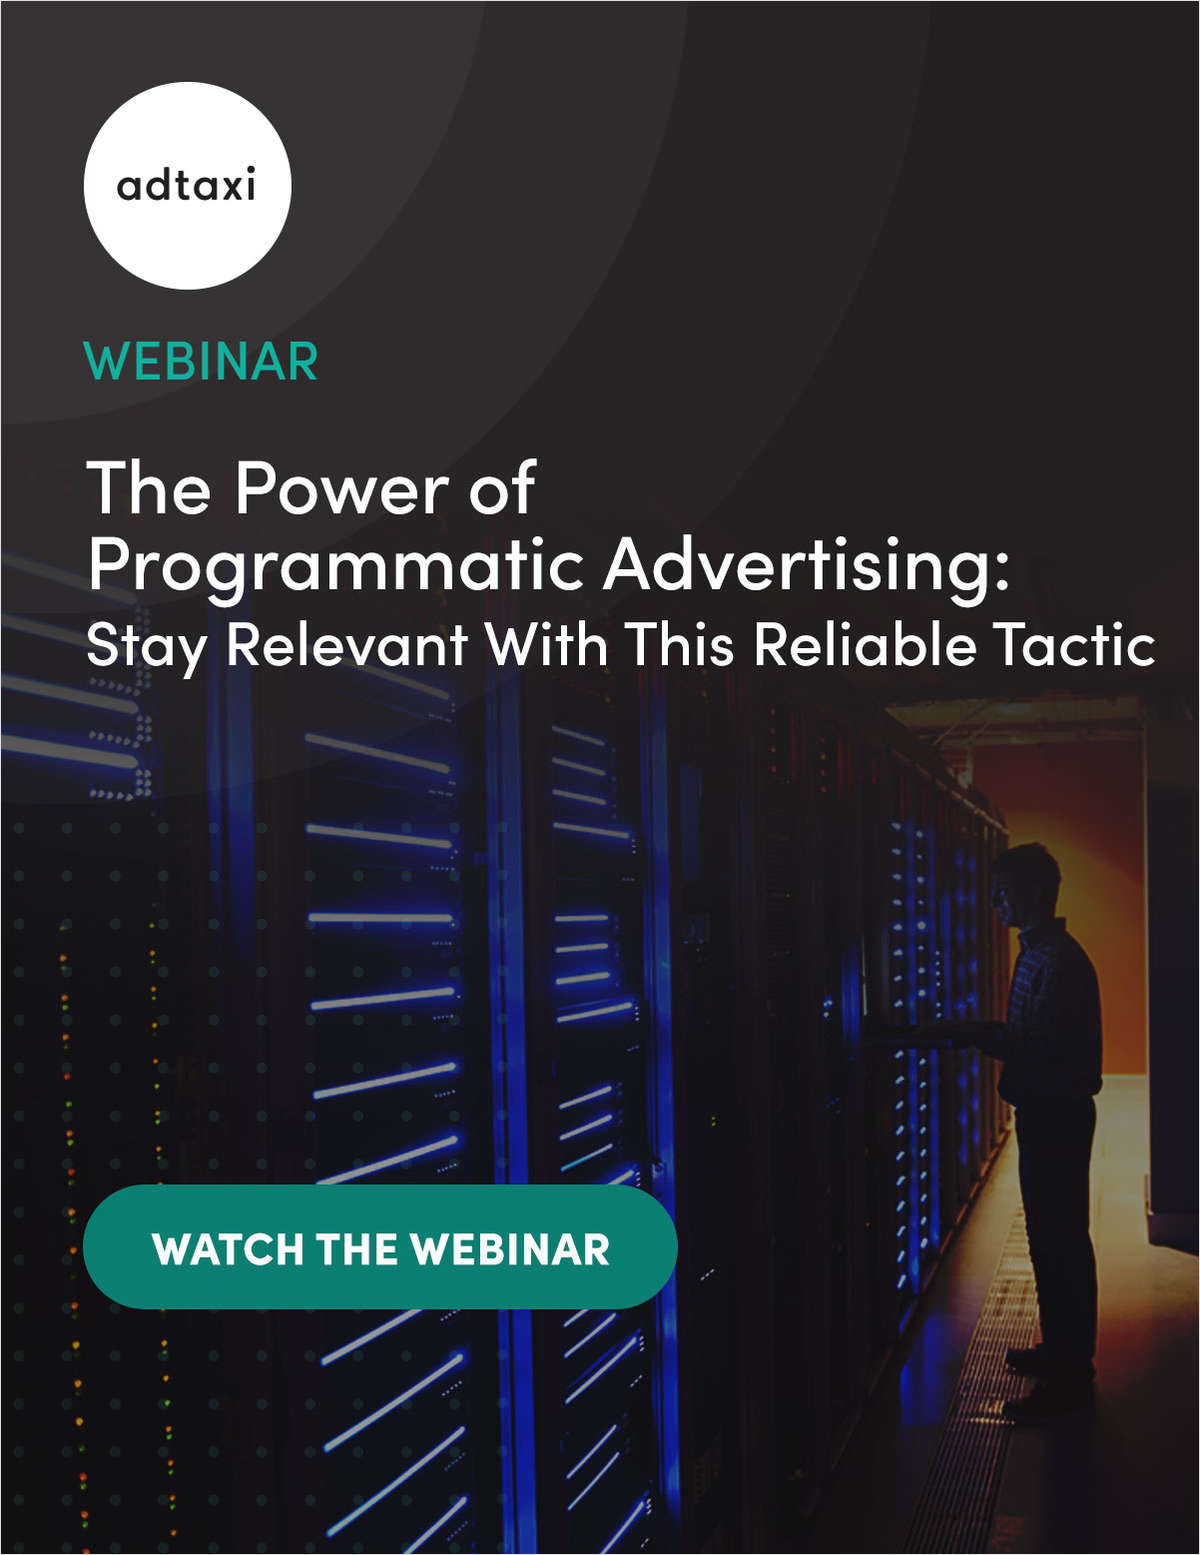 The Power of Programmatic Advertising: Stay Relevant With This Reliable Tactic